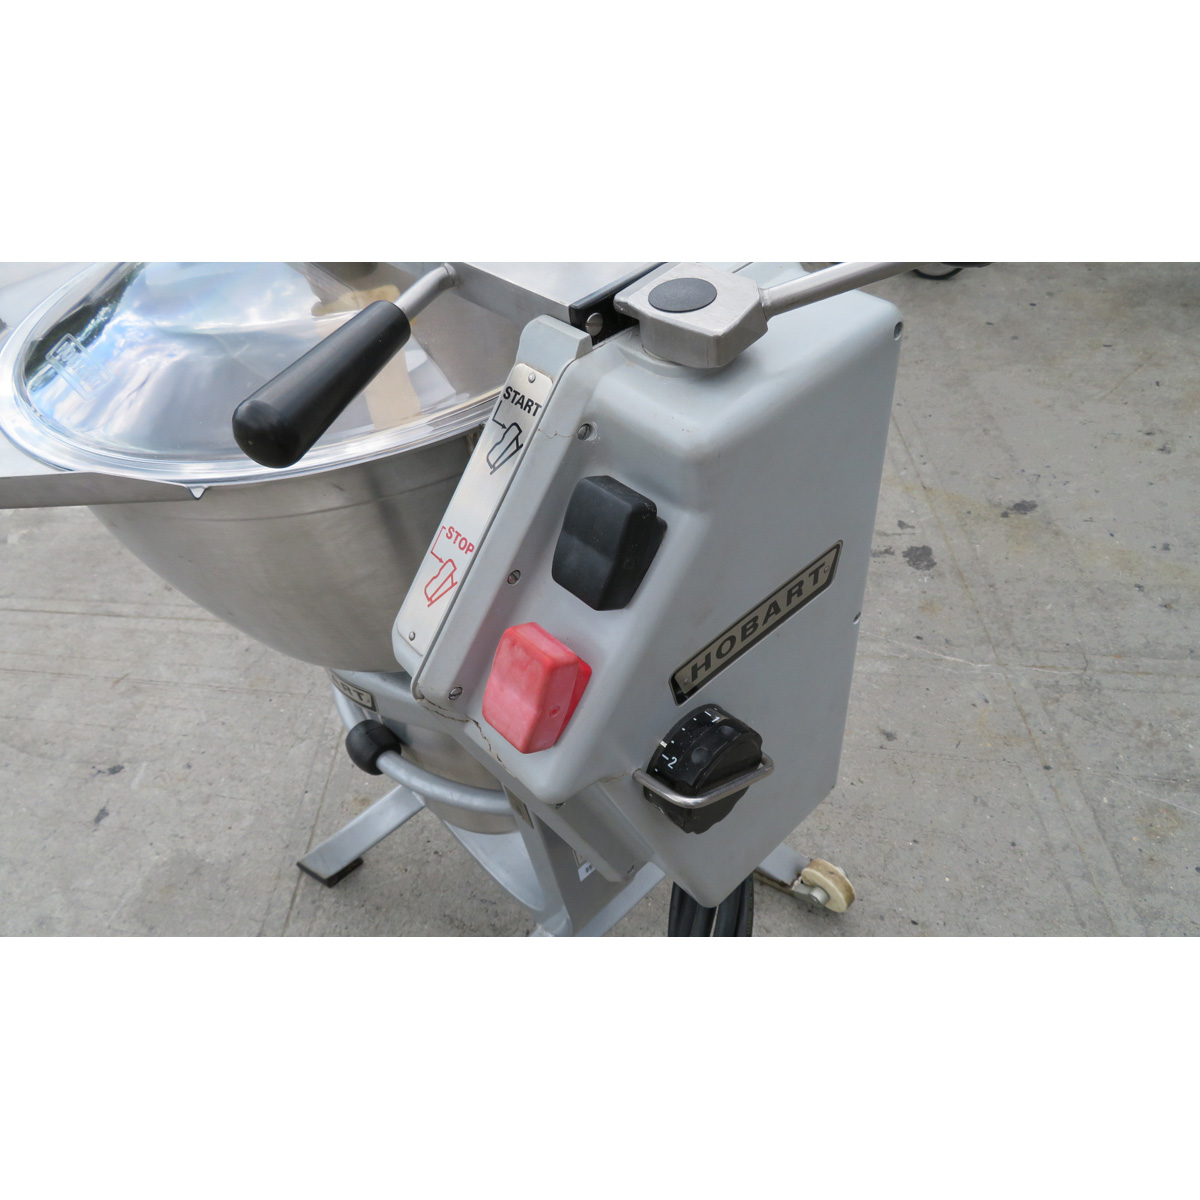 Hobart HCM-450 Vertical Cutter Mixer 45 Quart, Used Excellent Condition image 4